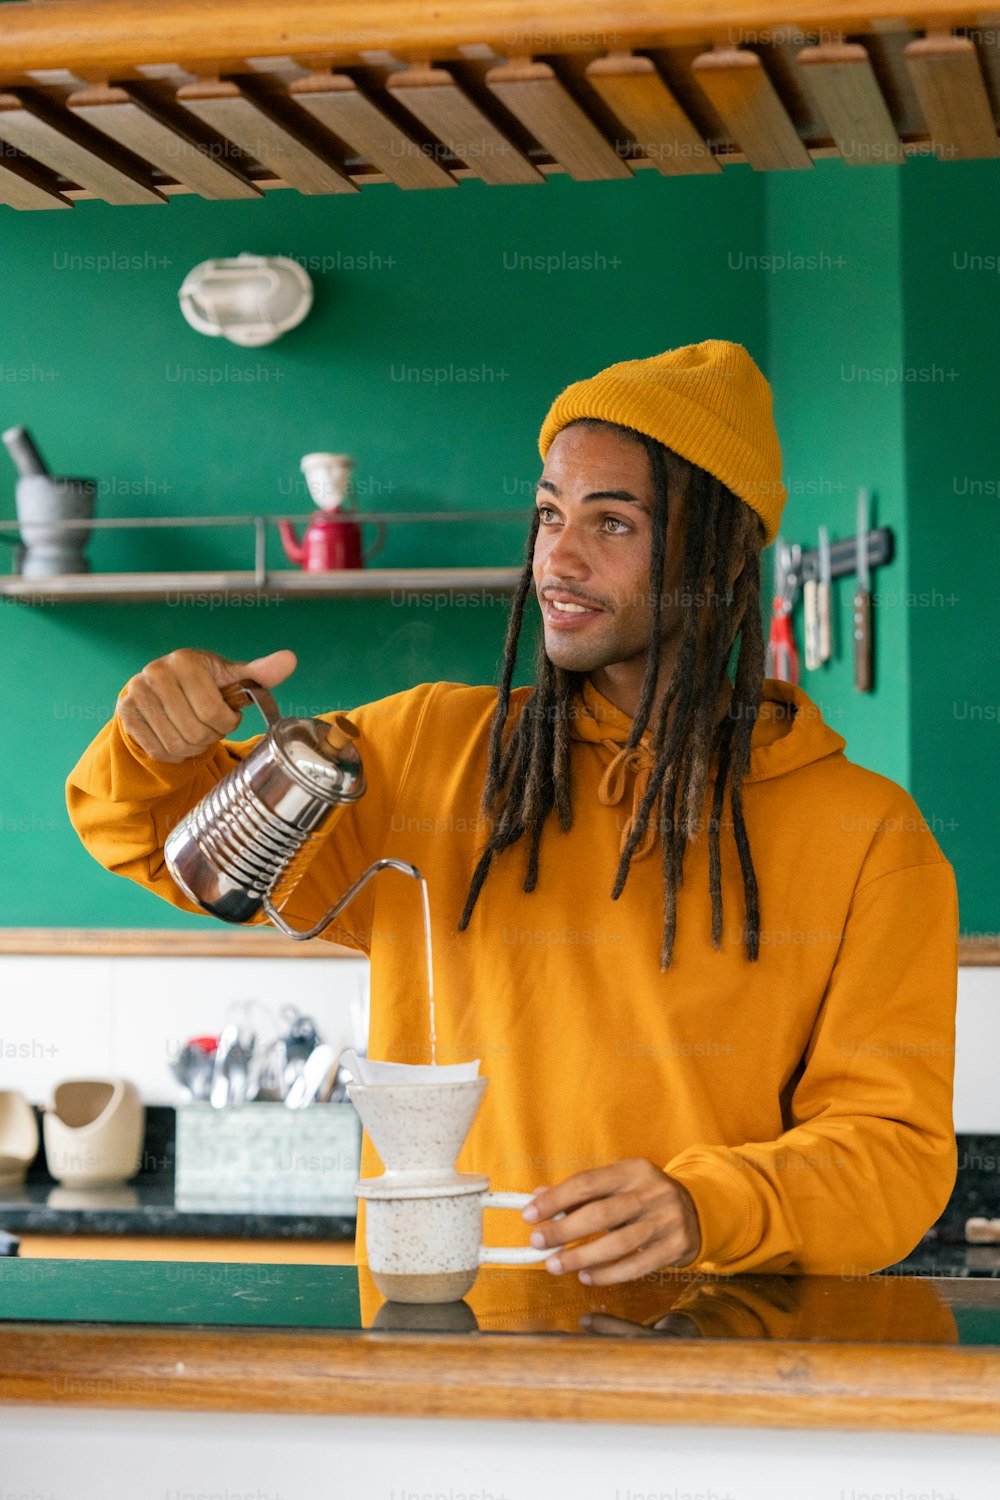 a man with dreadlocks pouring something into a cup